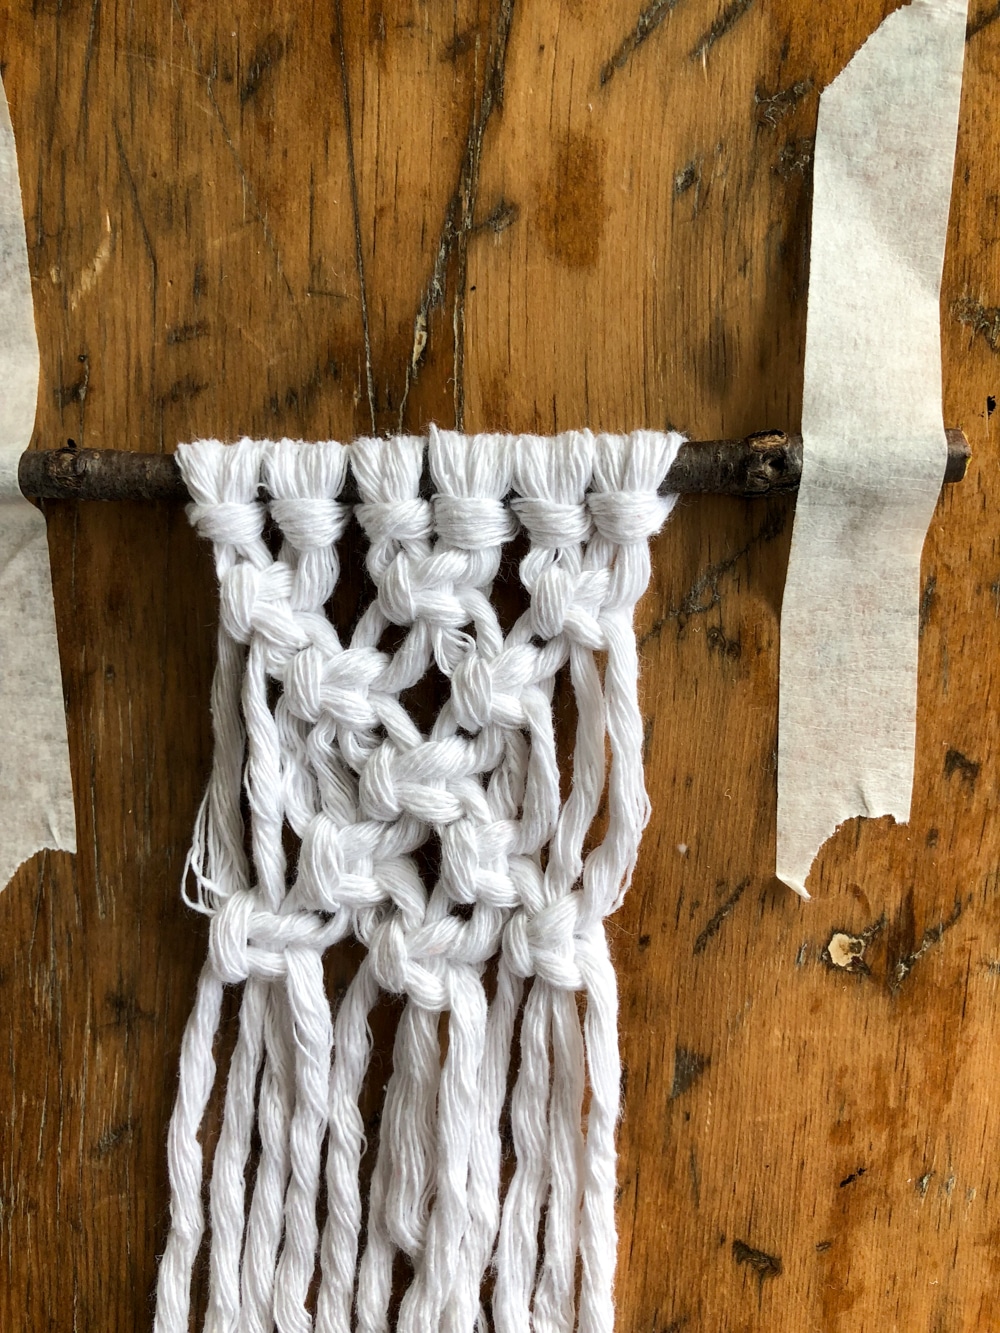 mini square knot macrame piece taped to a table